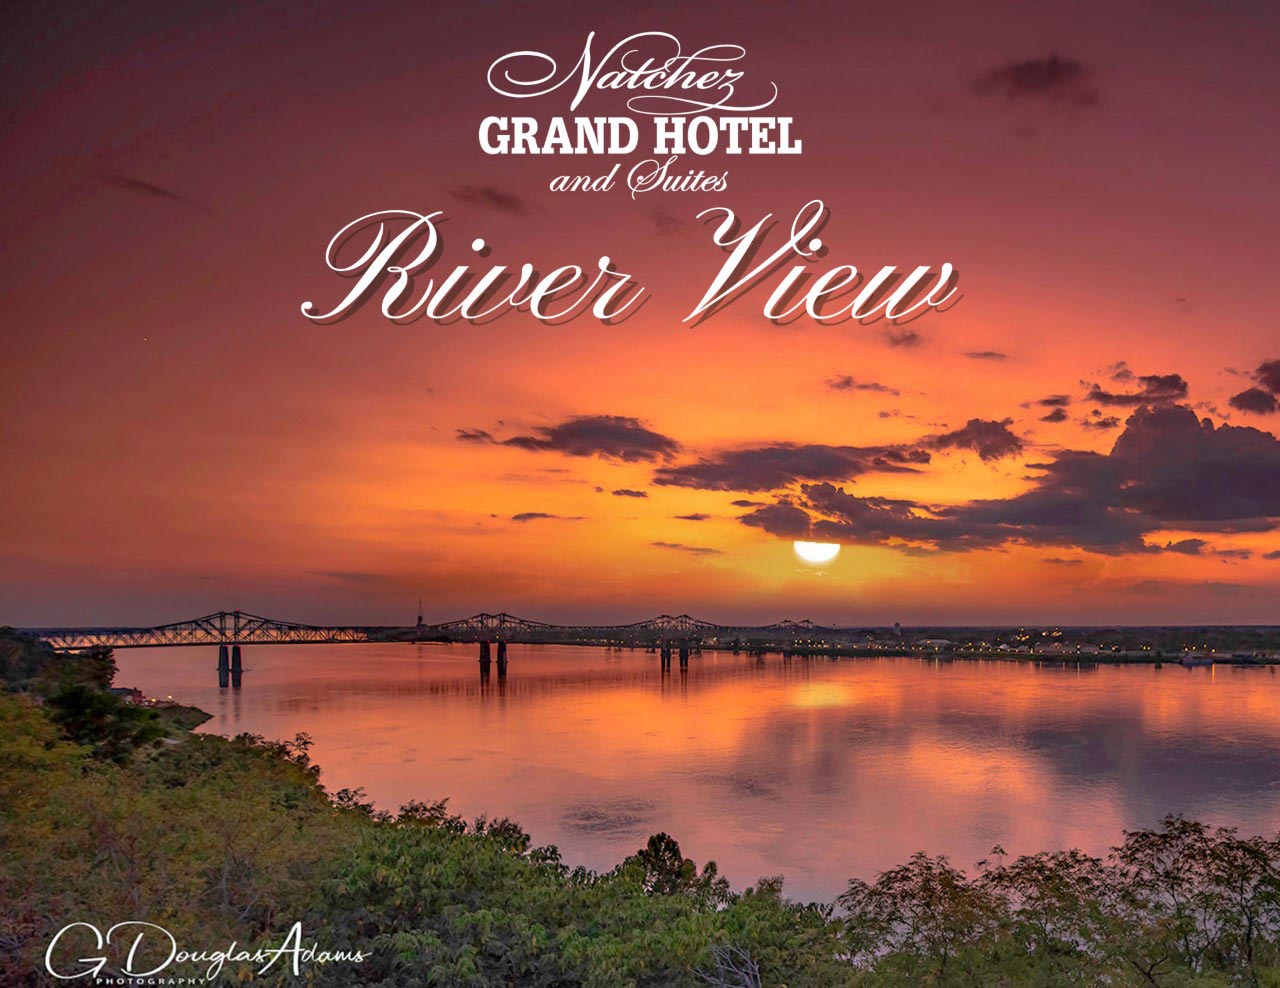 Natchez Grand Hotel and Suites River View